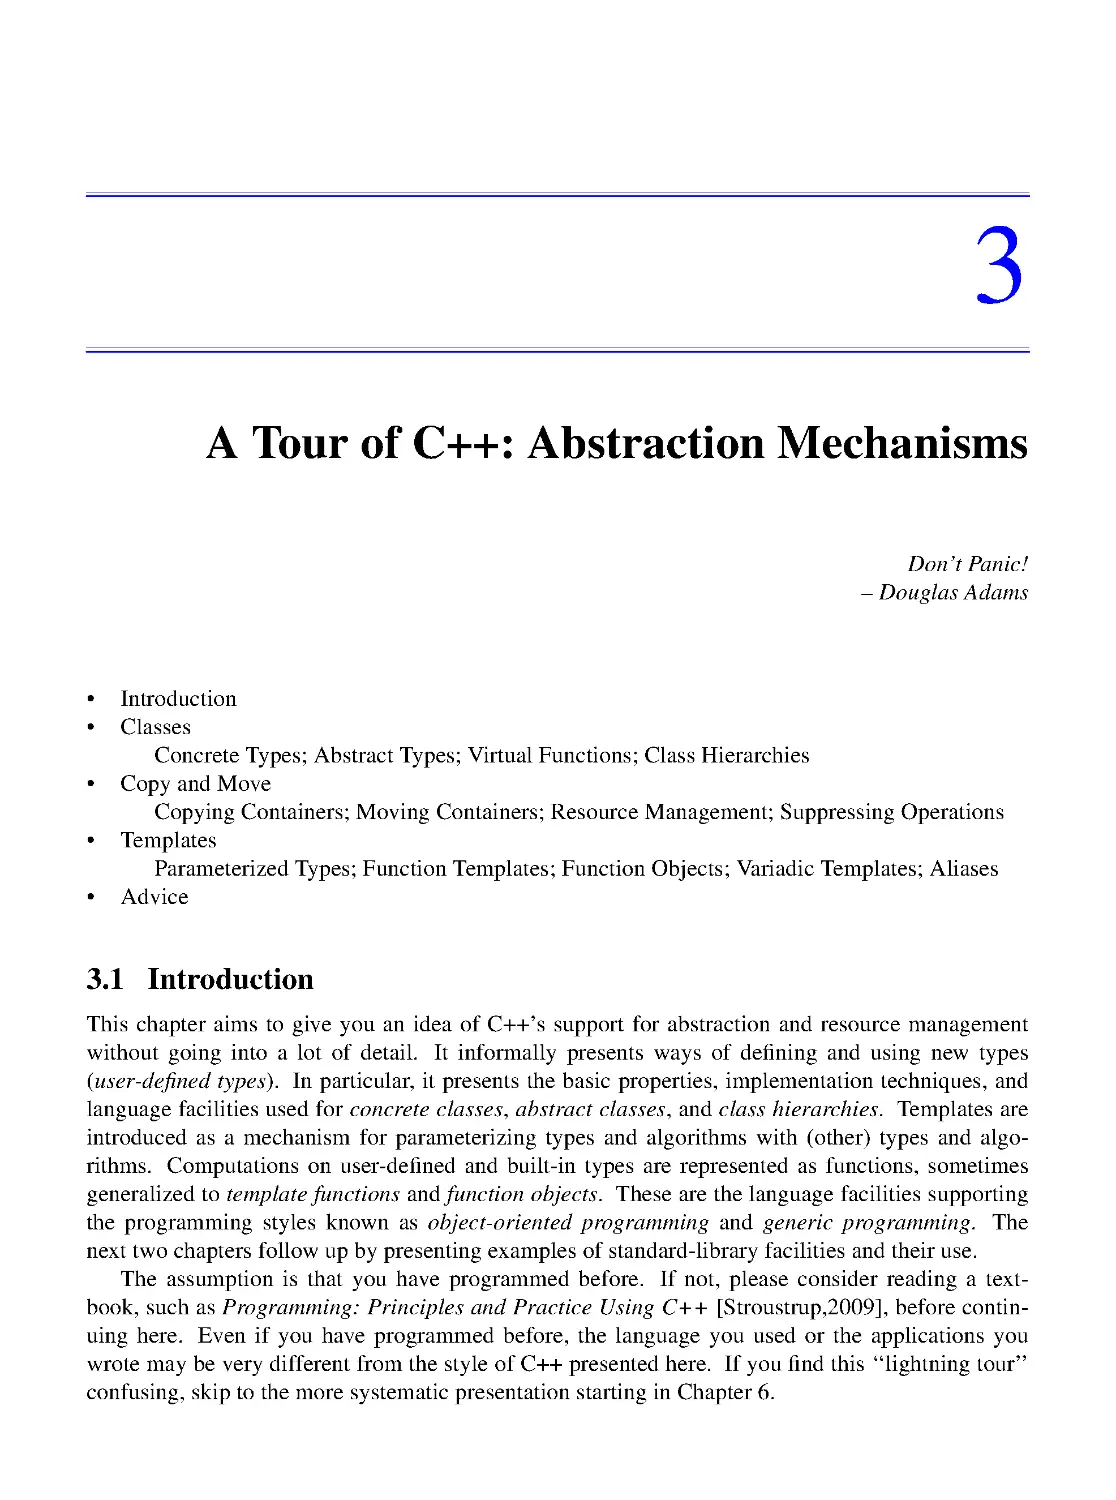 3. A Tour of C++: Abstraction Mechanisms